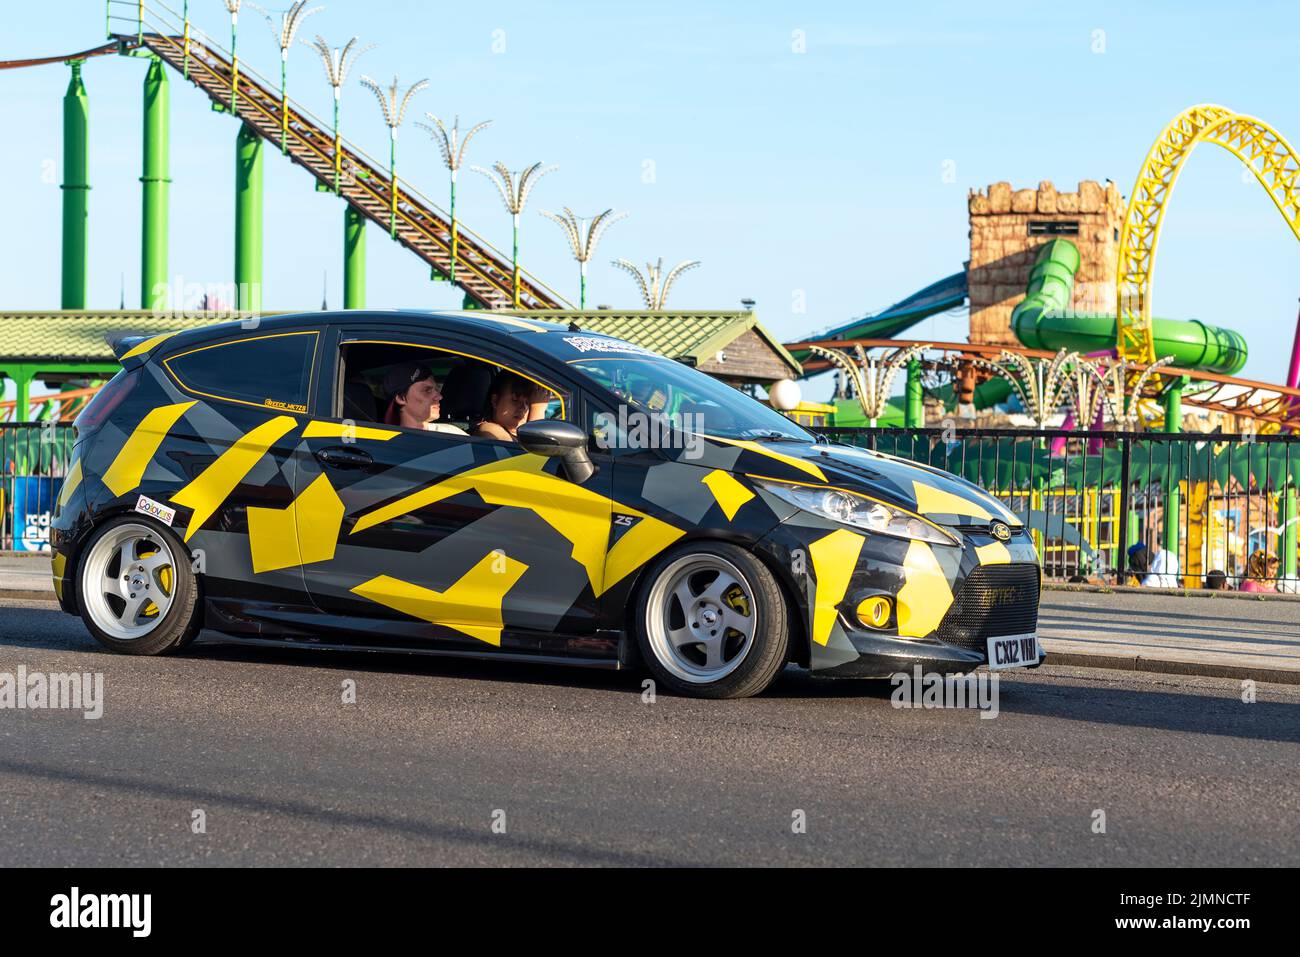 Car cruise event in Southend on Sea, Essex, UK, in the evening after a hot summer day. Ford Fiesta Zetec S with custom splinter camo wrap colours Stock Photo